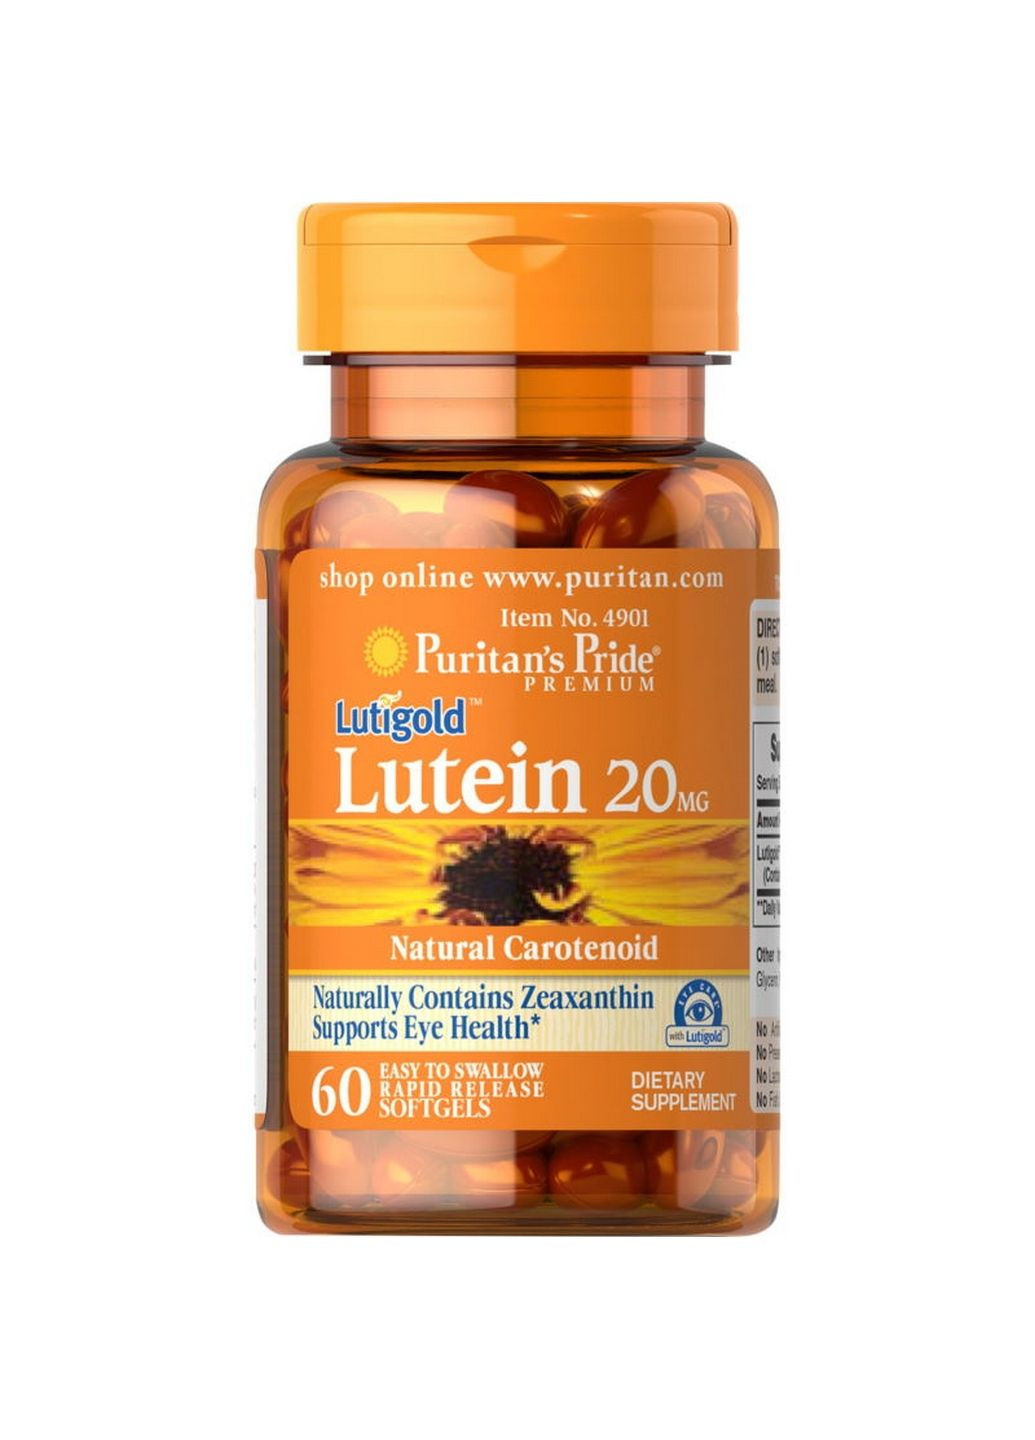 Натуральна добавка Lutein 20 mg with Zeaxanthin, 60 капсул Puritans Pride (293341852)